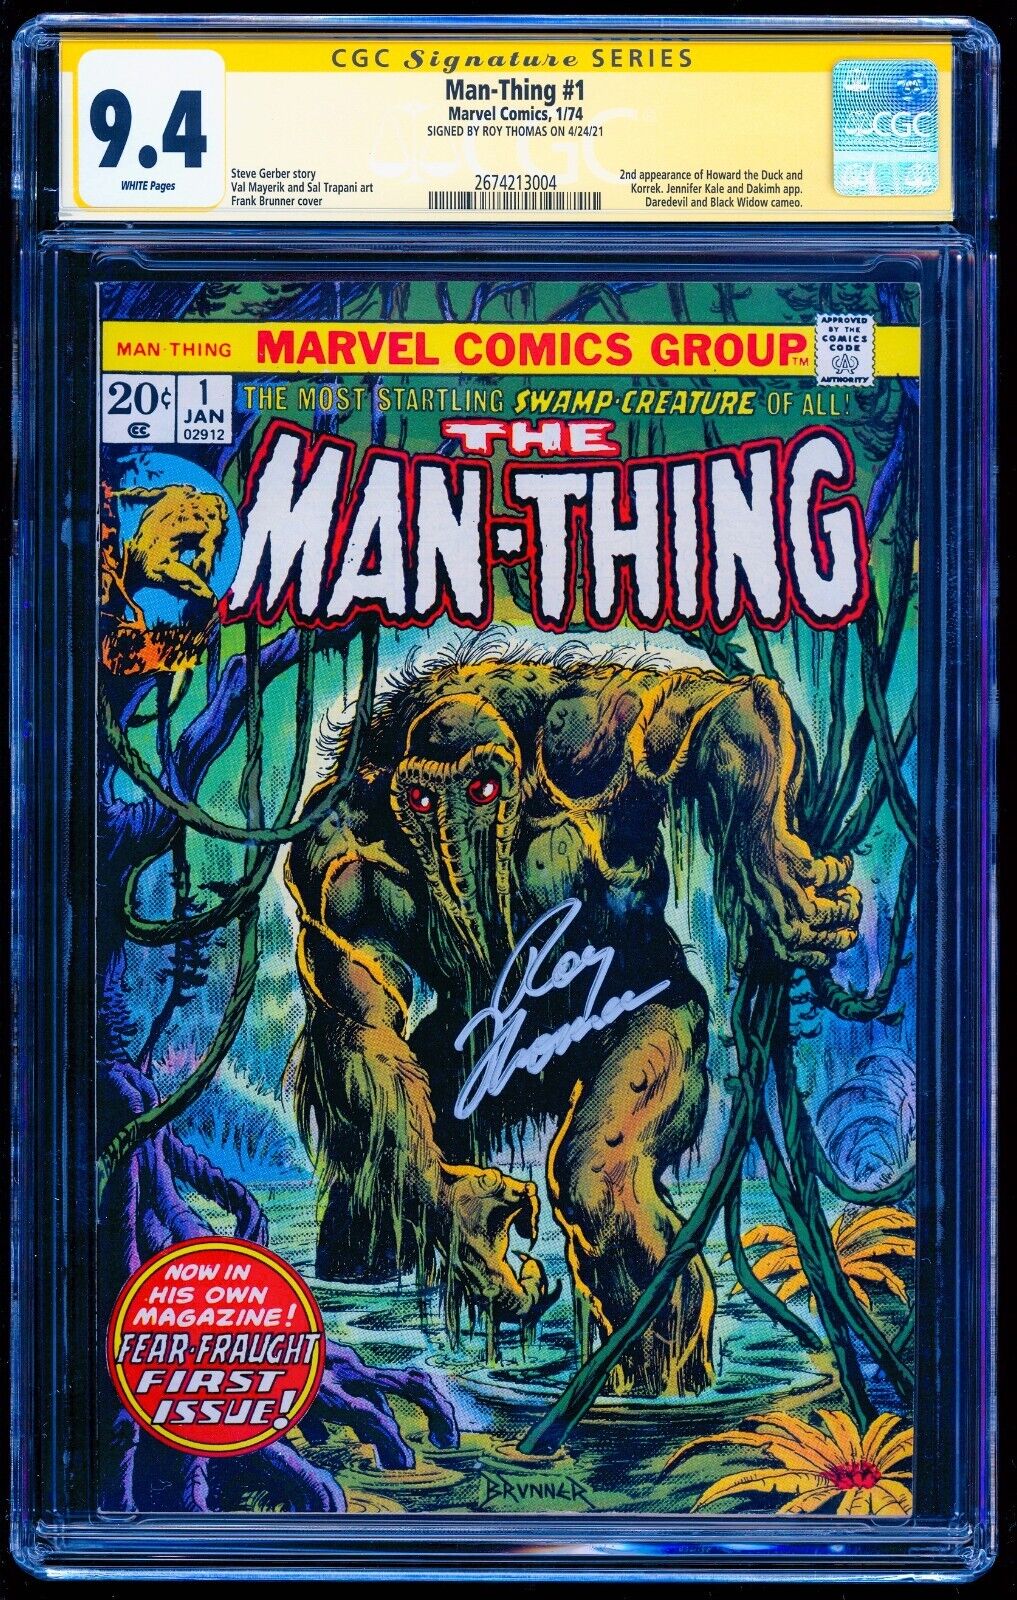 MAN-THING 1 CGC 9.4 SS WHITE PGS FRANK BRUNER CVR💎 BUY OUR FEAR 19 GET $25 OFF